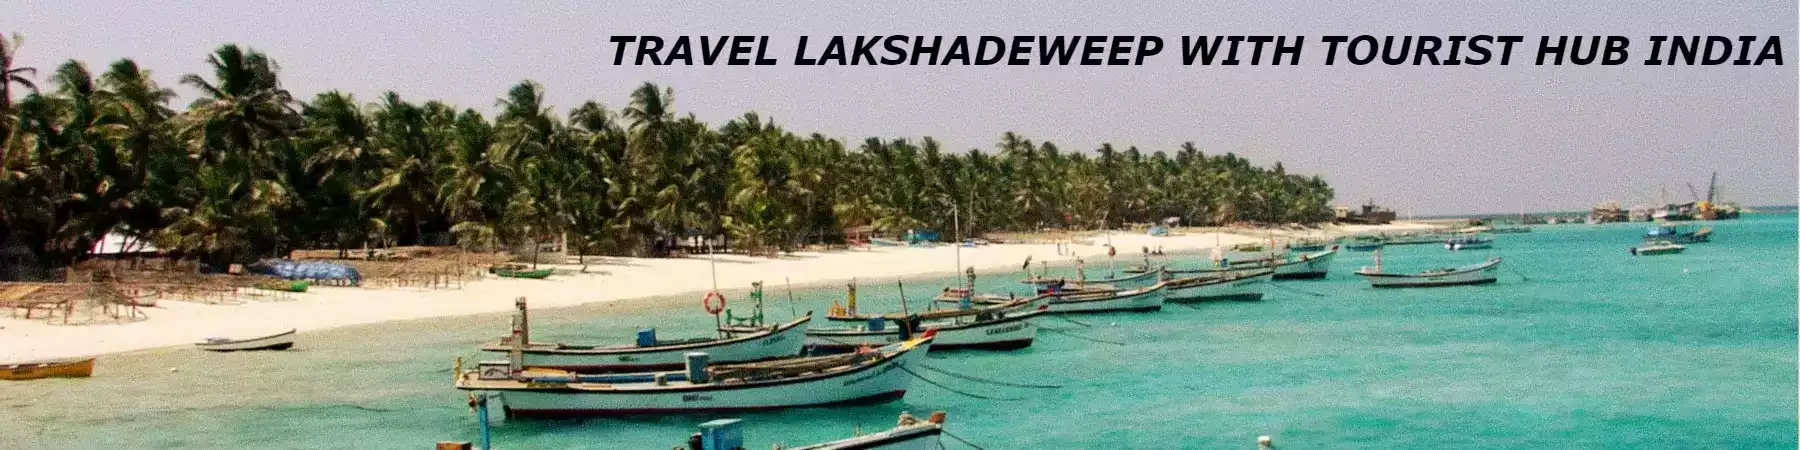 Lakshadweep holiday packages from Calicut with Tourist Hub India - The Best Lakshadweep Travel Agency